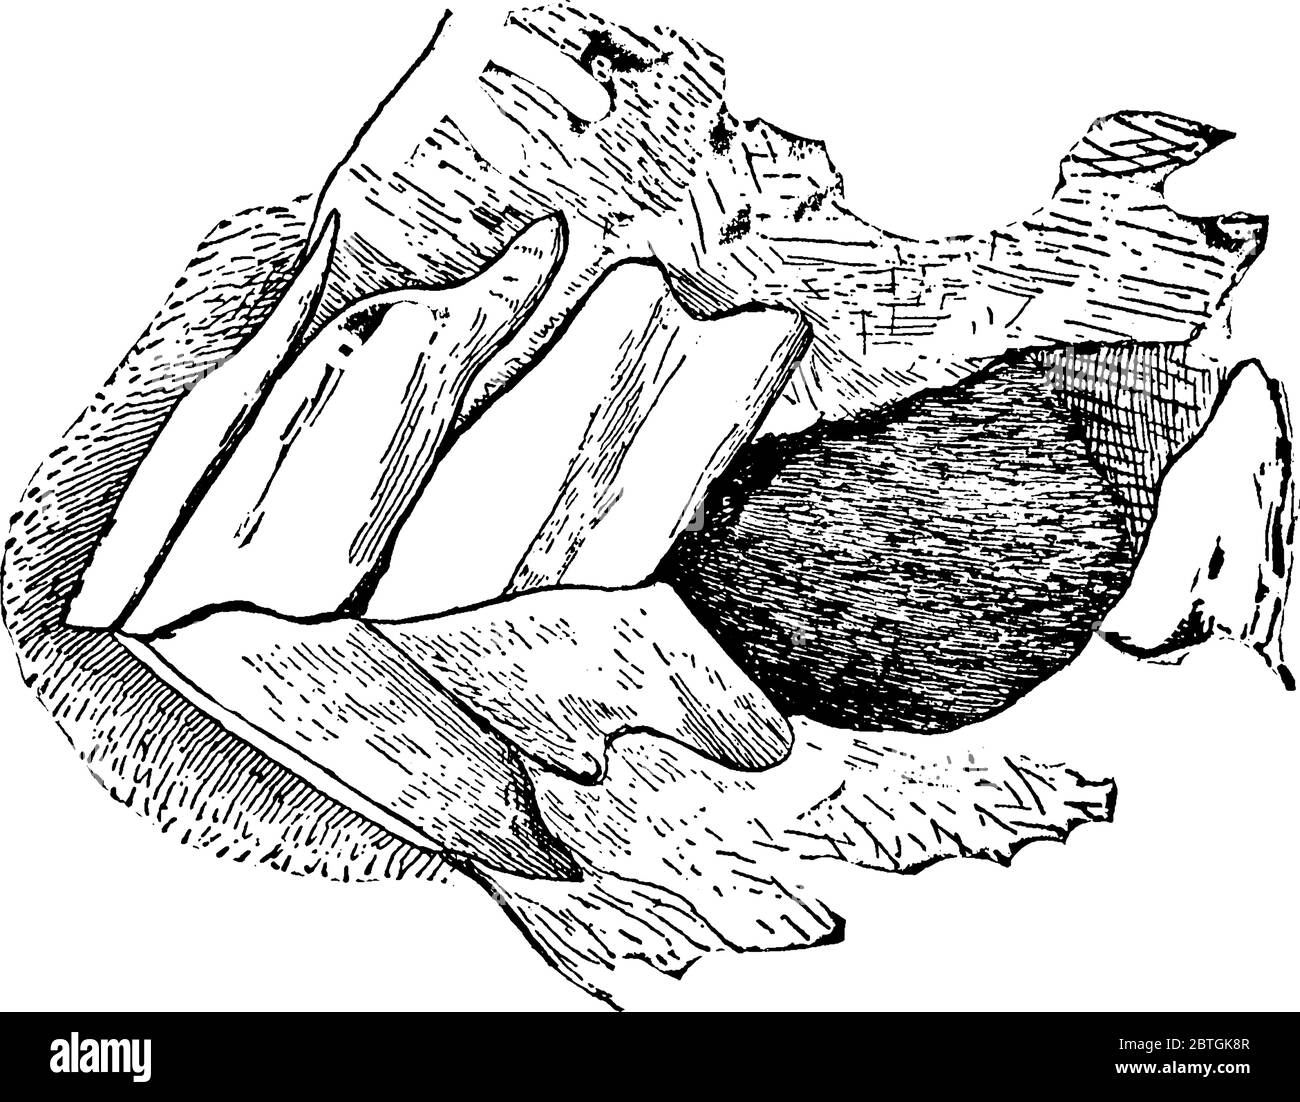 Jaw of young castrated male horse (side view)., vintage line drawing or engraving illustration. Stock Vector